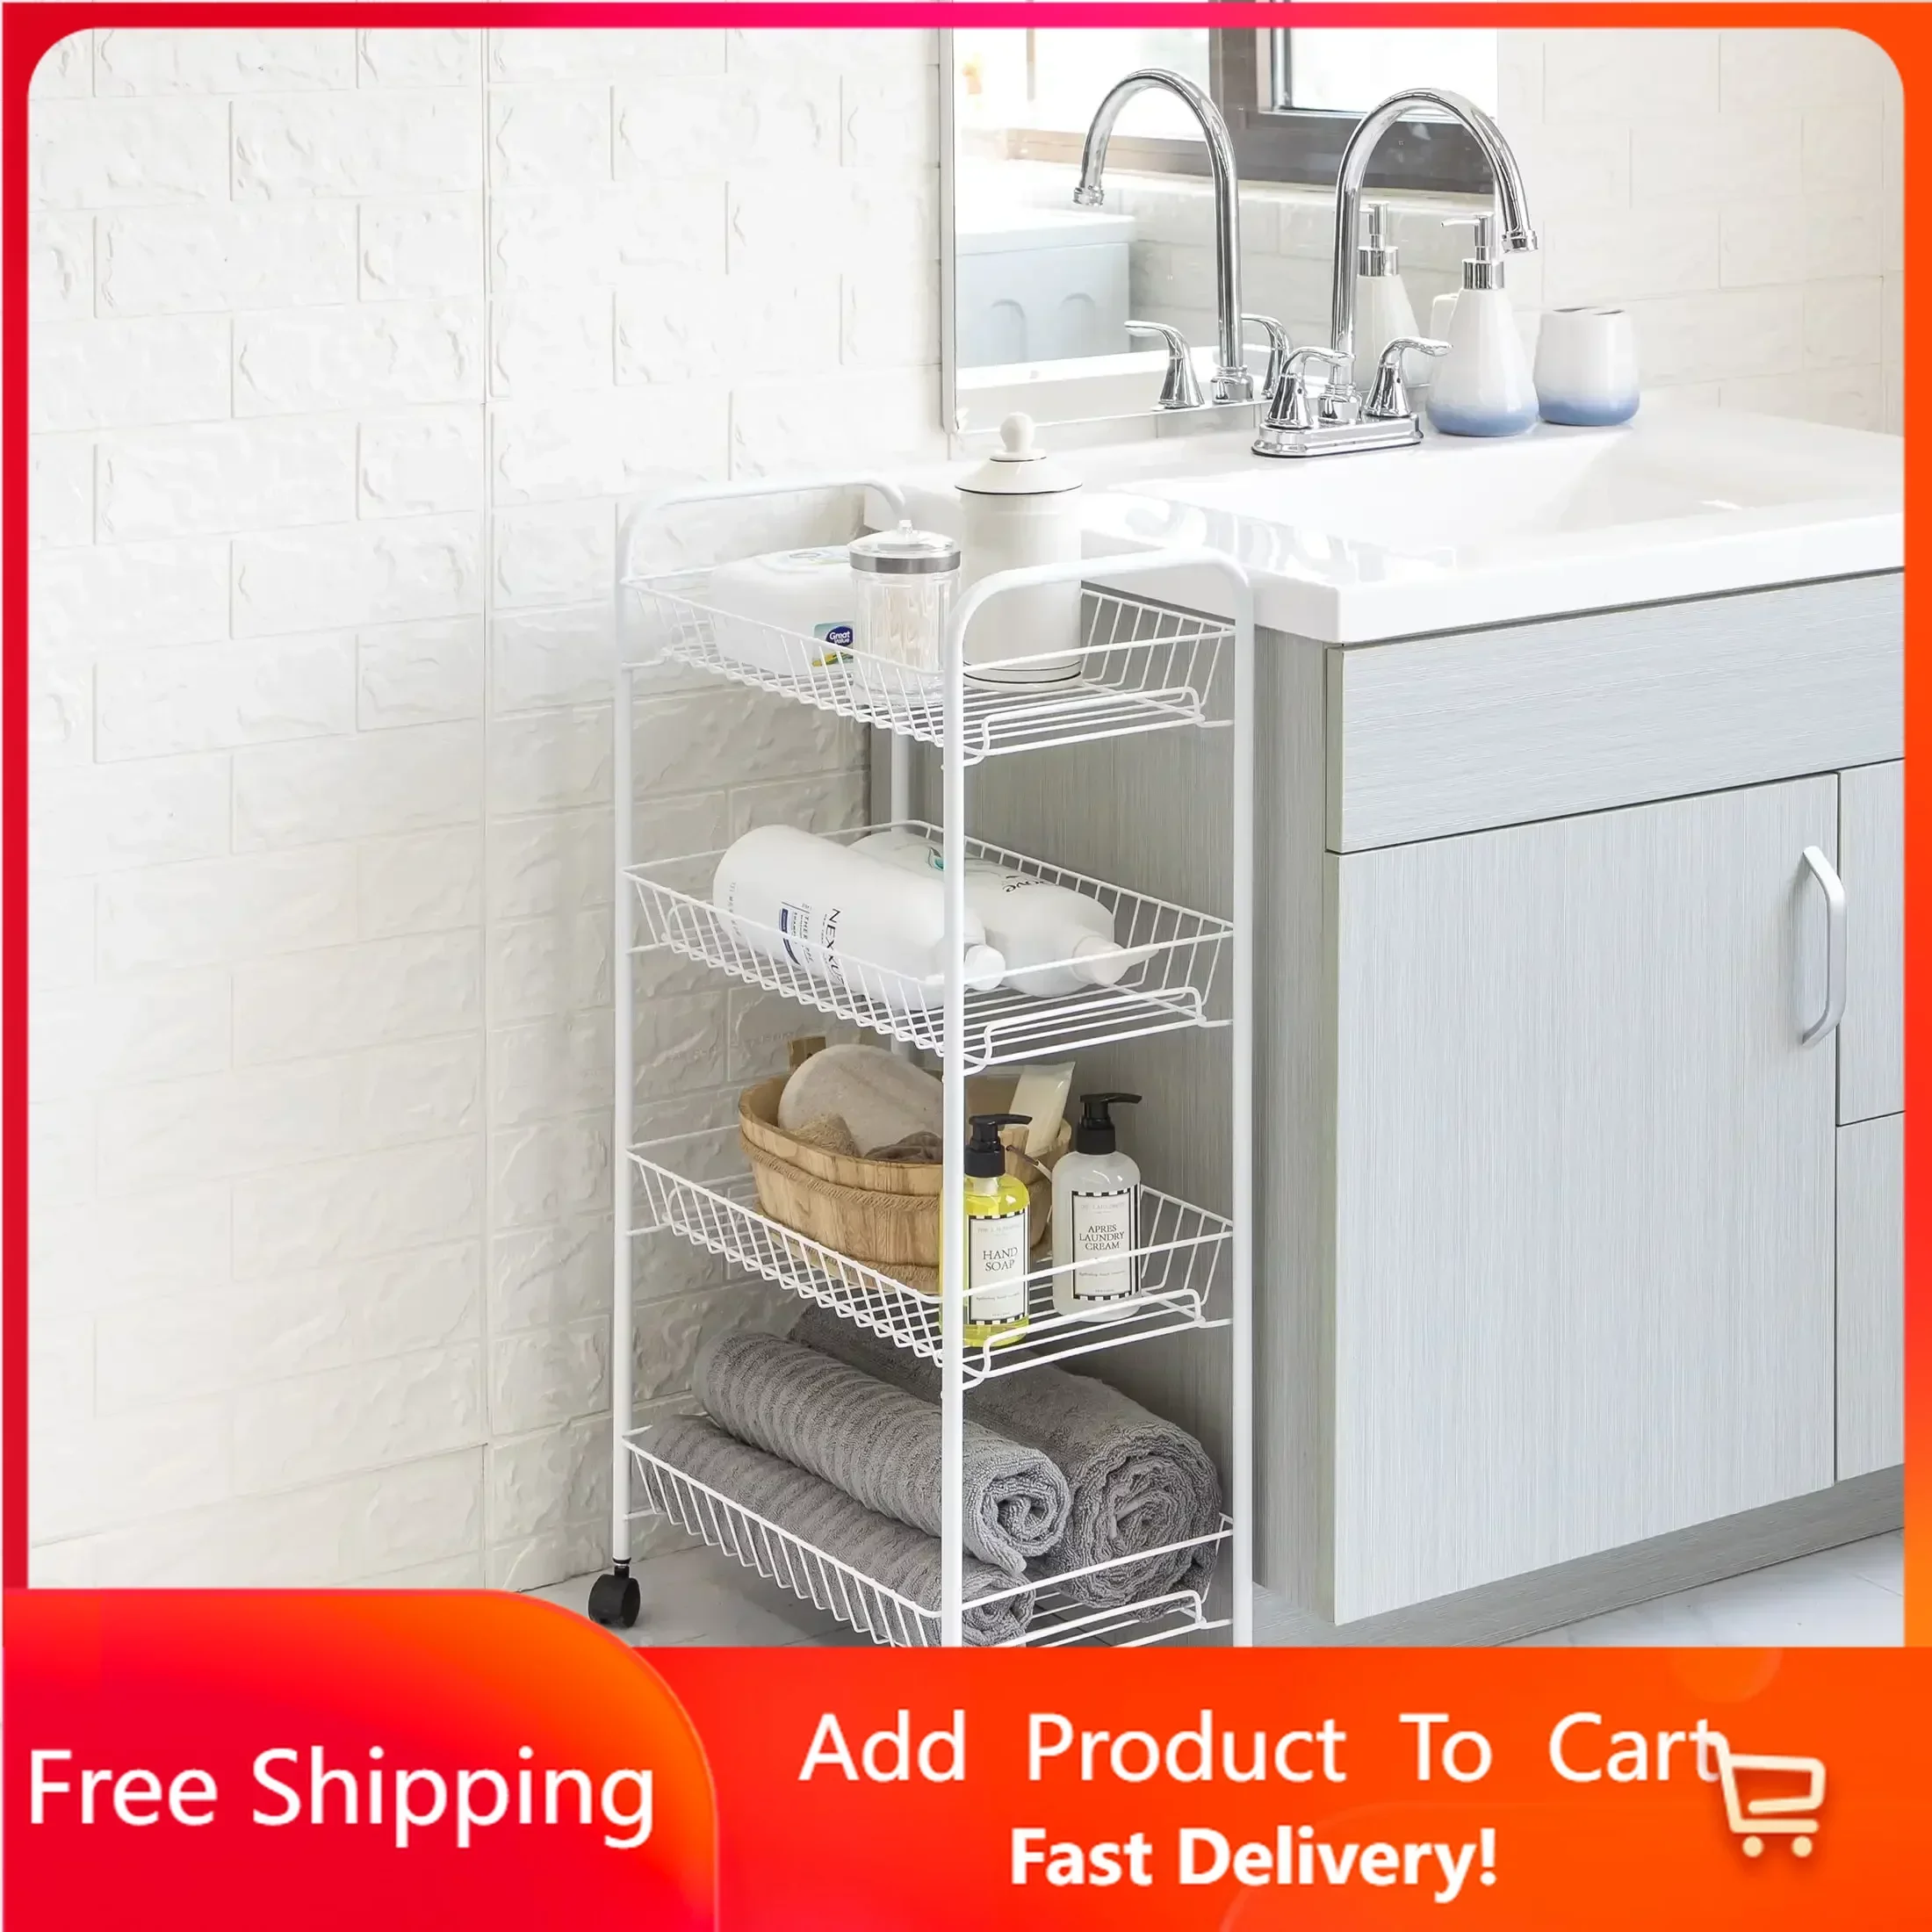 

4-Shelf Steel Laundry Cart with Caster Wheels, White, Adult, Senior and Teen Age Groups Rapid Transit Free Shipping